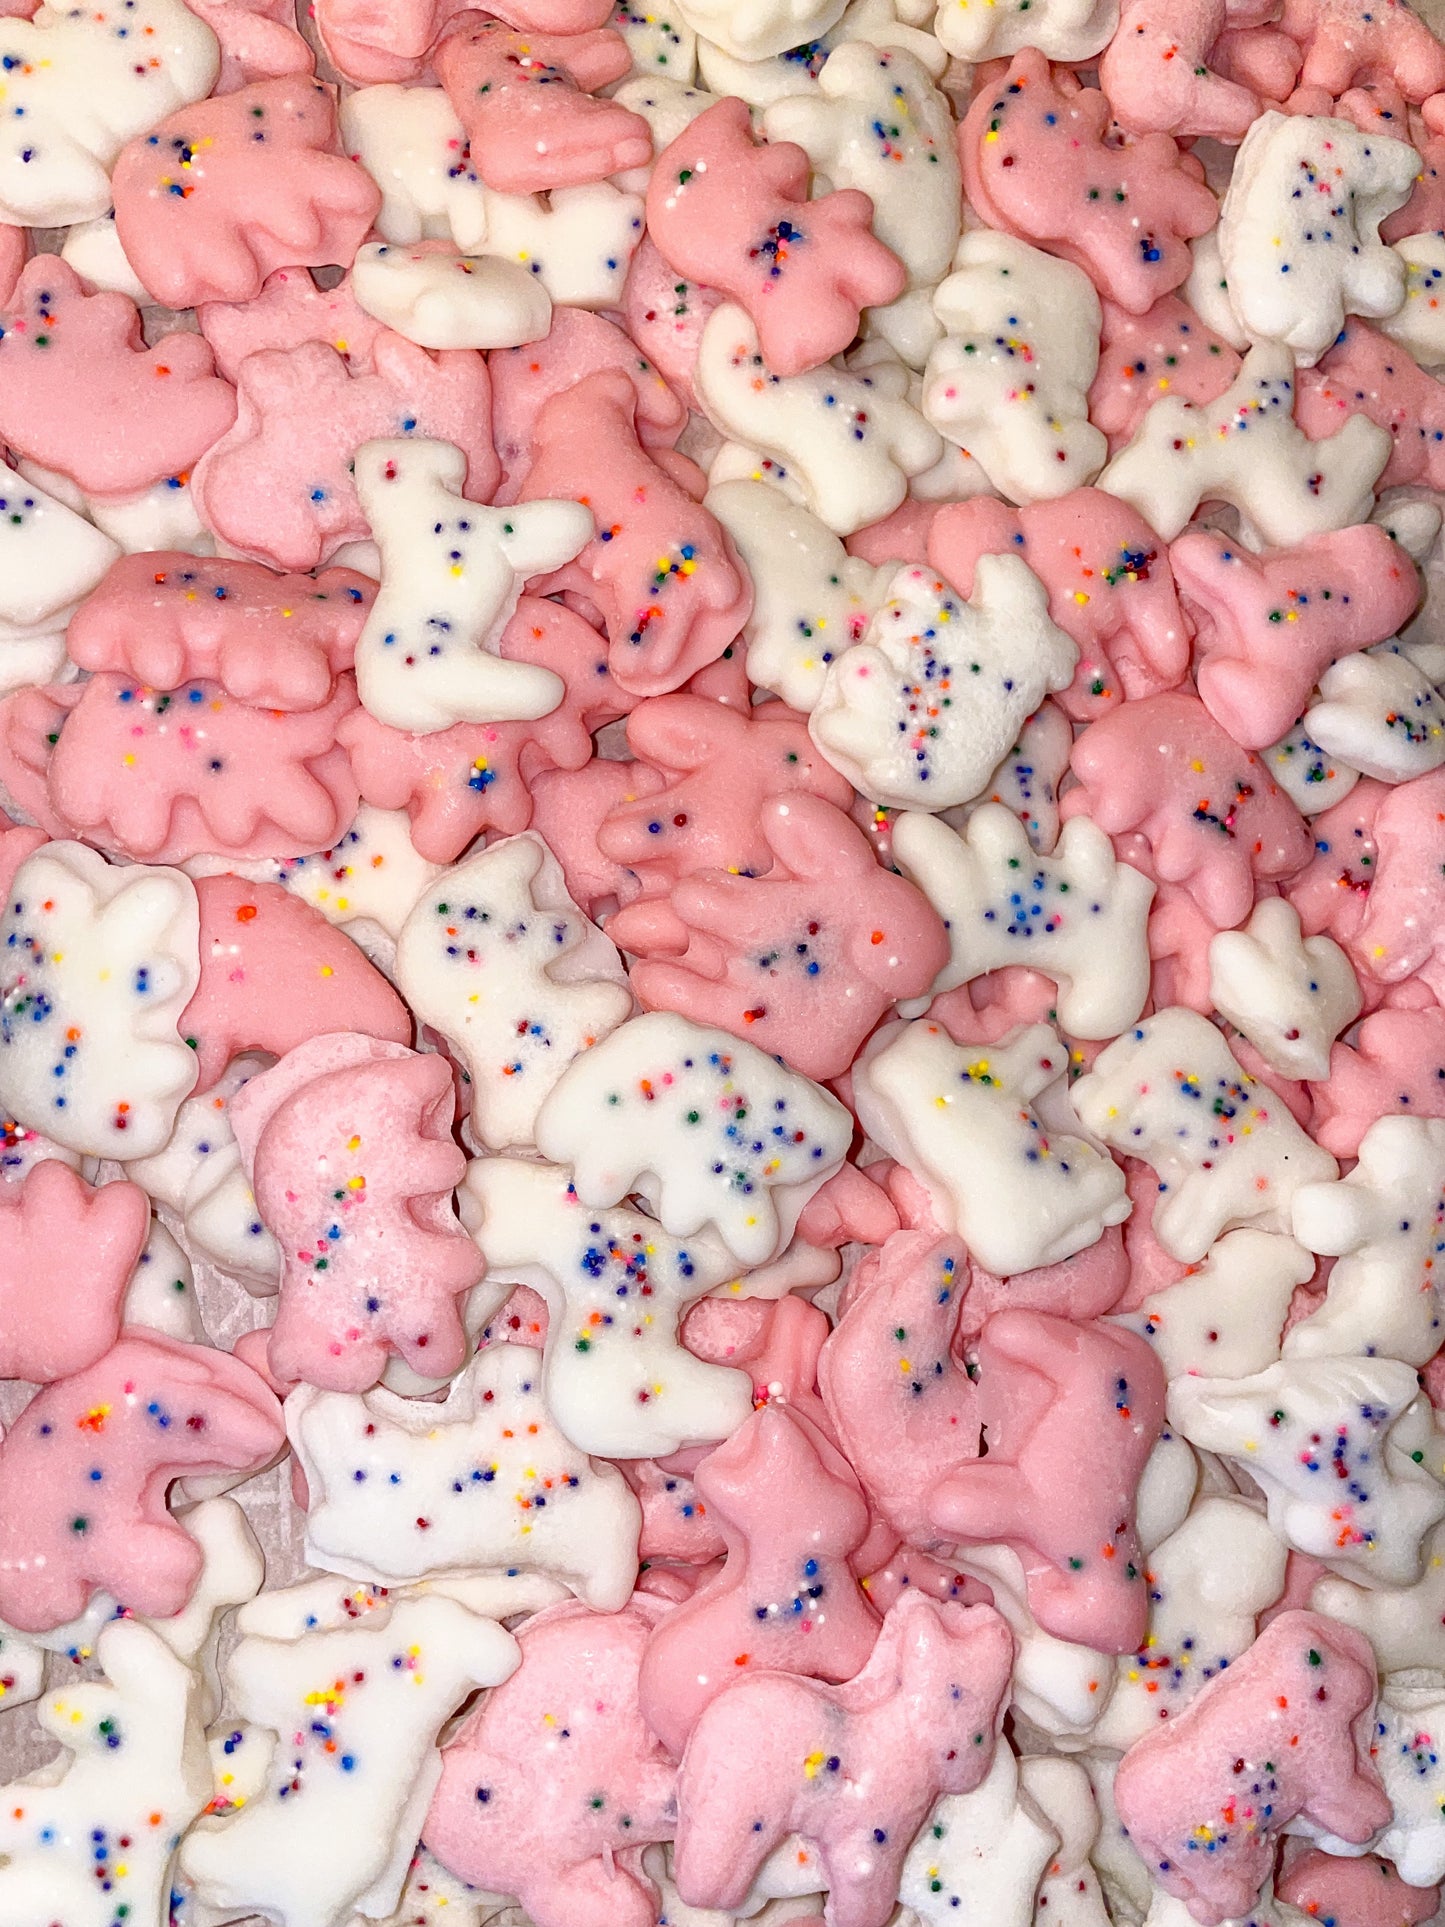 Frosted animal cookies